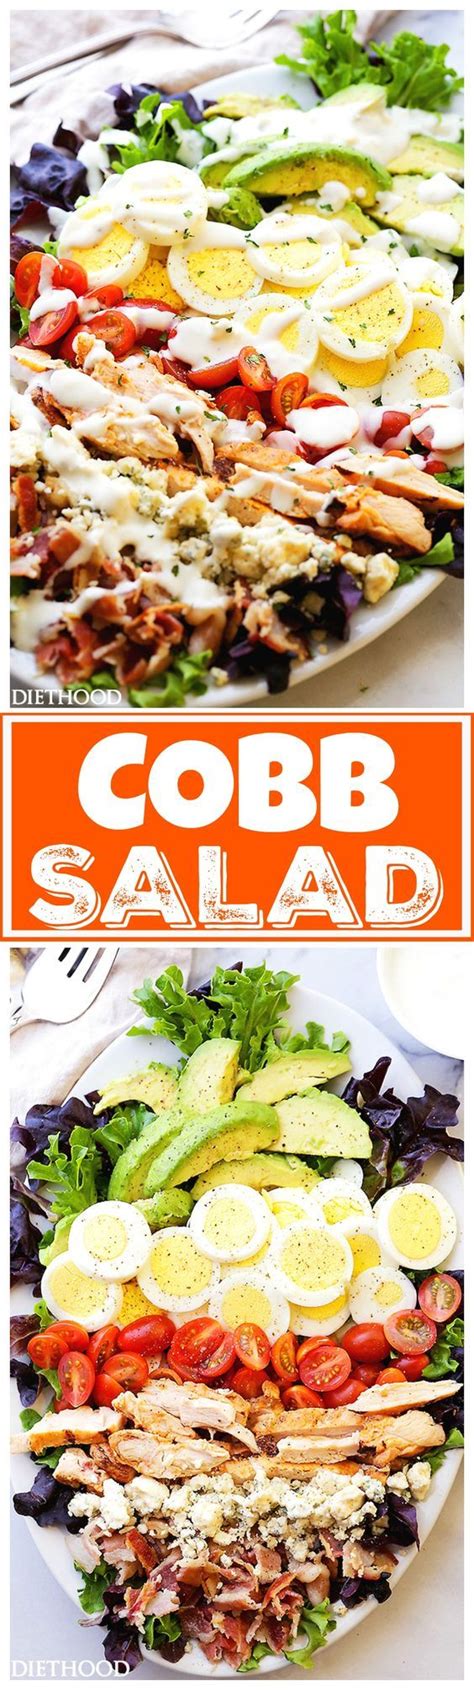 Cobb Salad Recipe This Classic American Main Dish Salad Is Packed